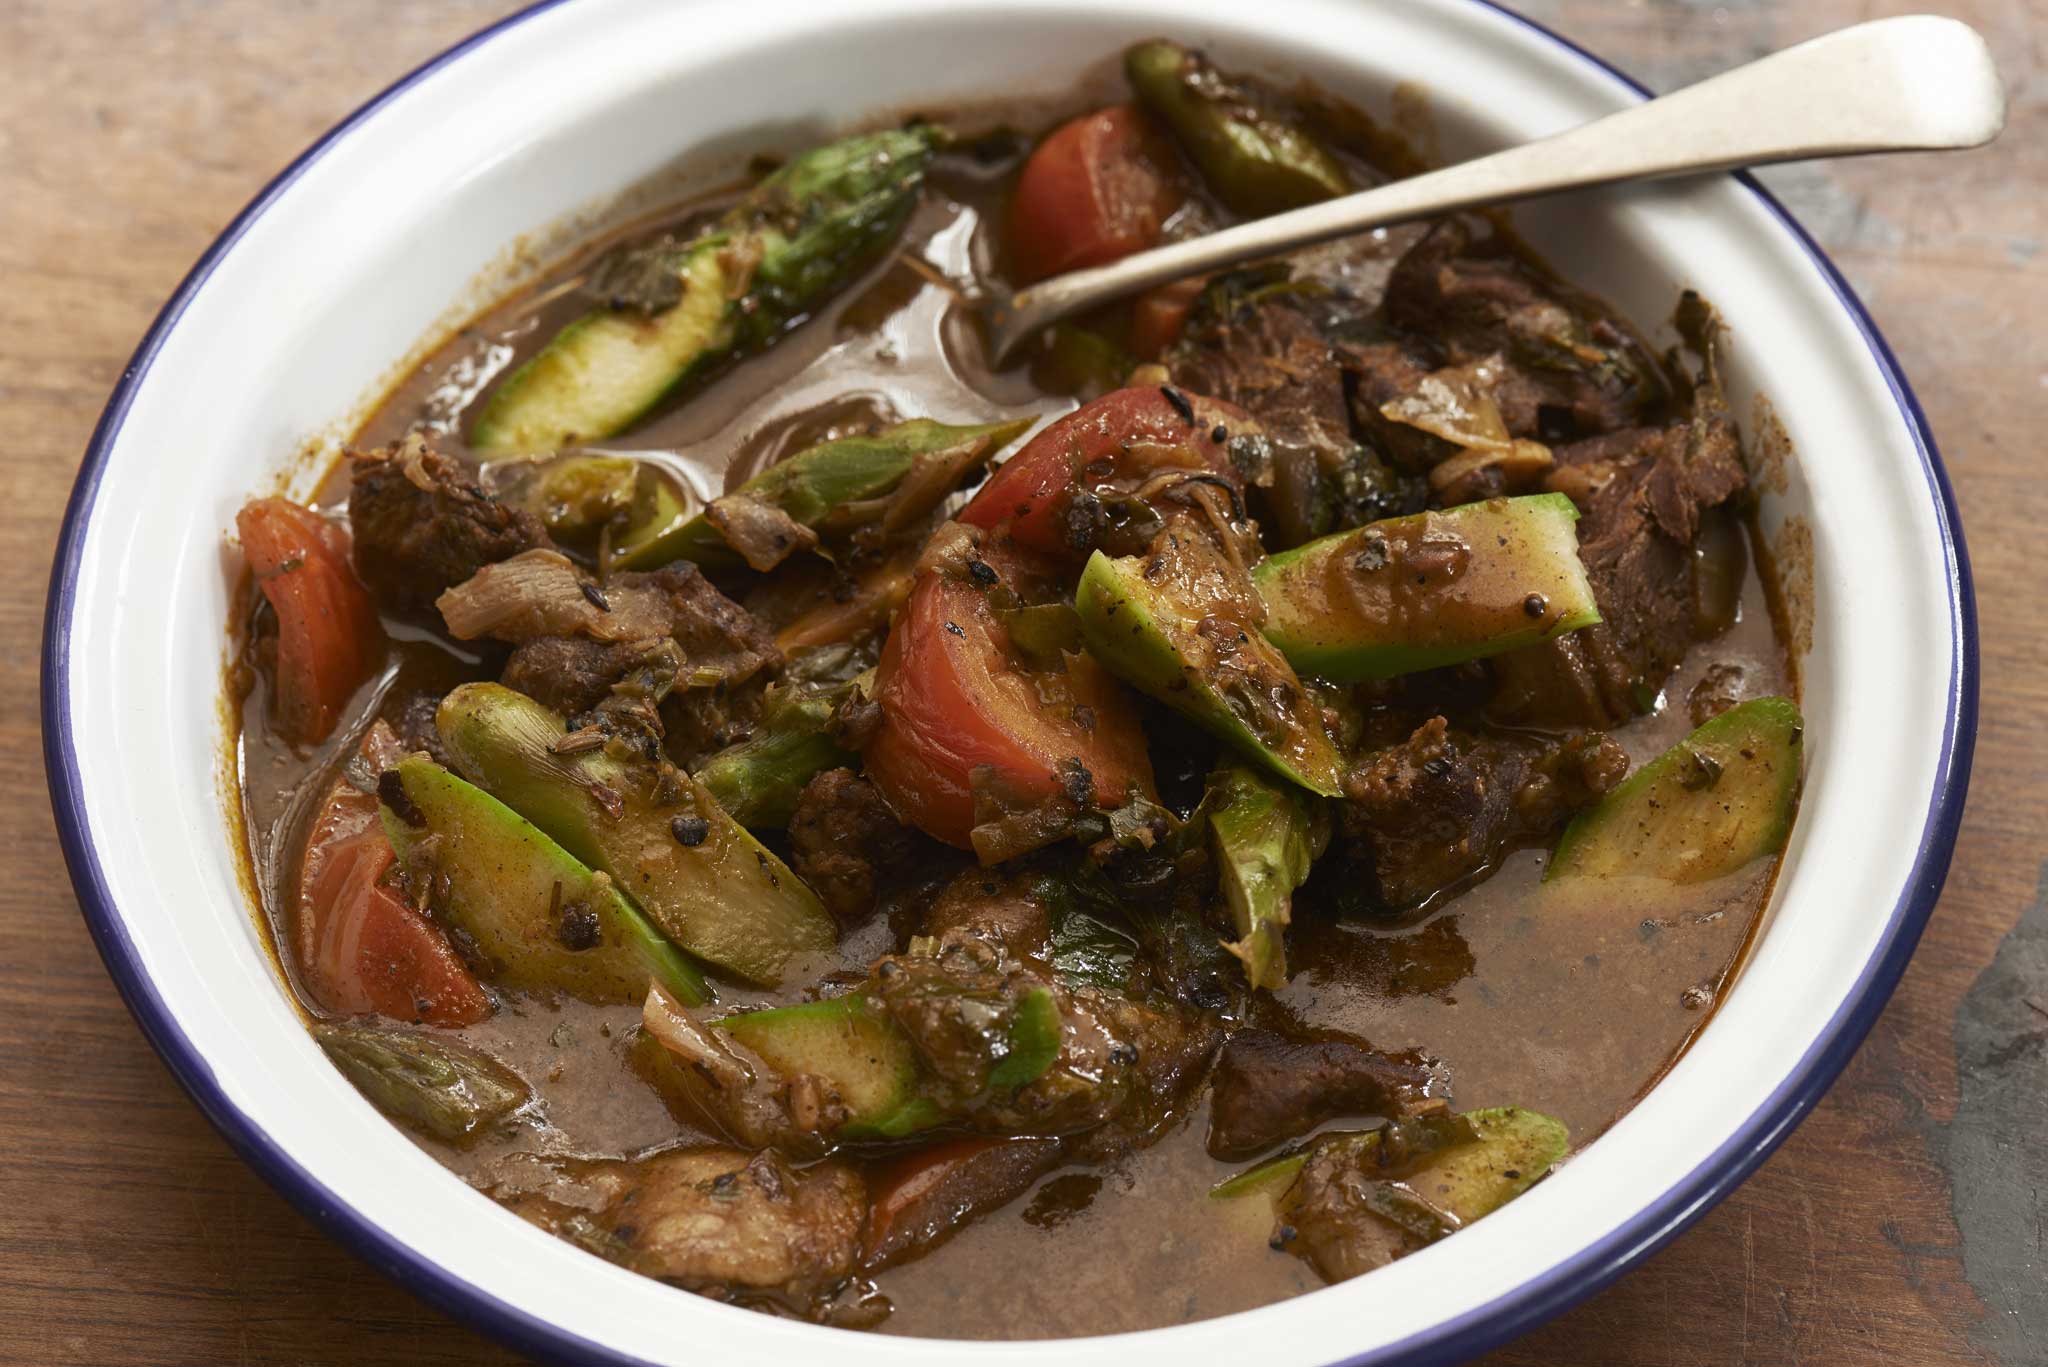 Full of flavour: Lamb, tomato and asparagus curry